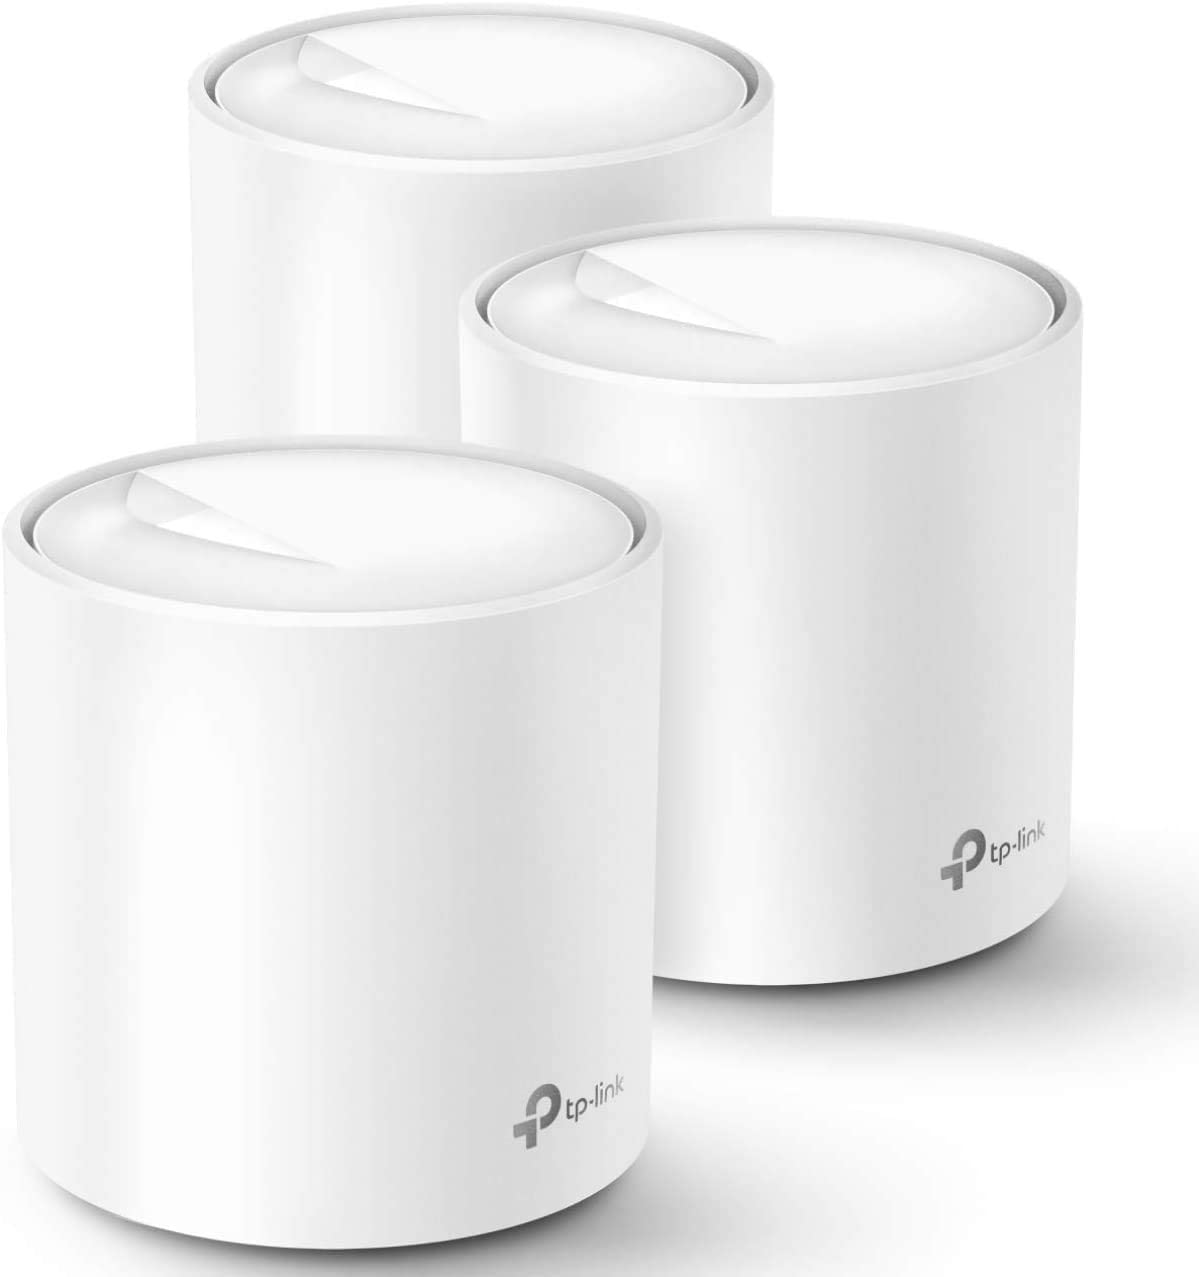 TP-Link Deco AX1800 WiFi 6 Mesh System (Deco X20) - Covers up to 5,800 Sq. Ft., Replaces Wireless Internet Routers and Extenders, 6 Ethernet Ports in total, supports Ethernet Backhaul, 3-Pack WiFi 6|AX1800 3-Pack